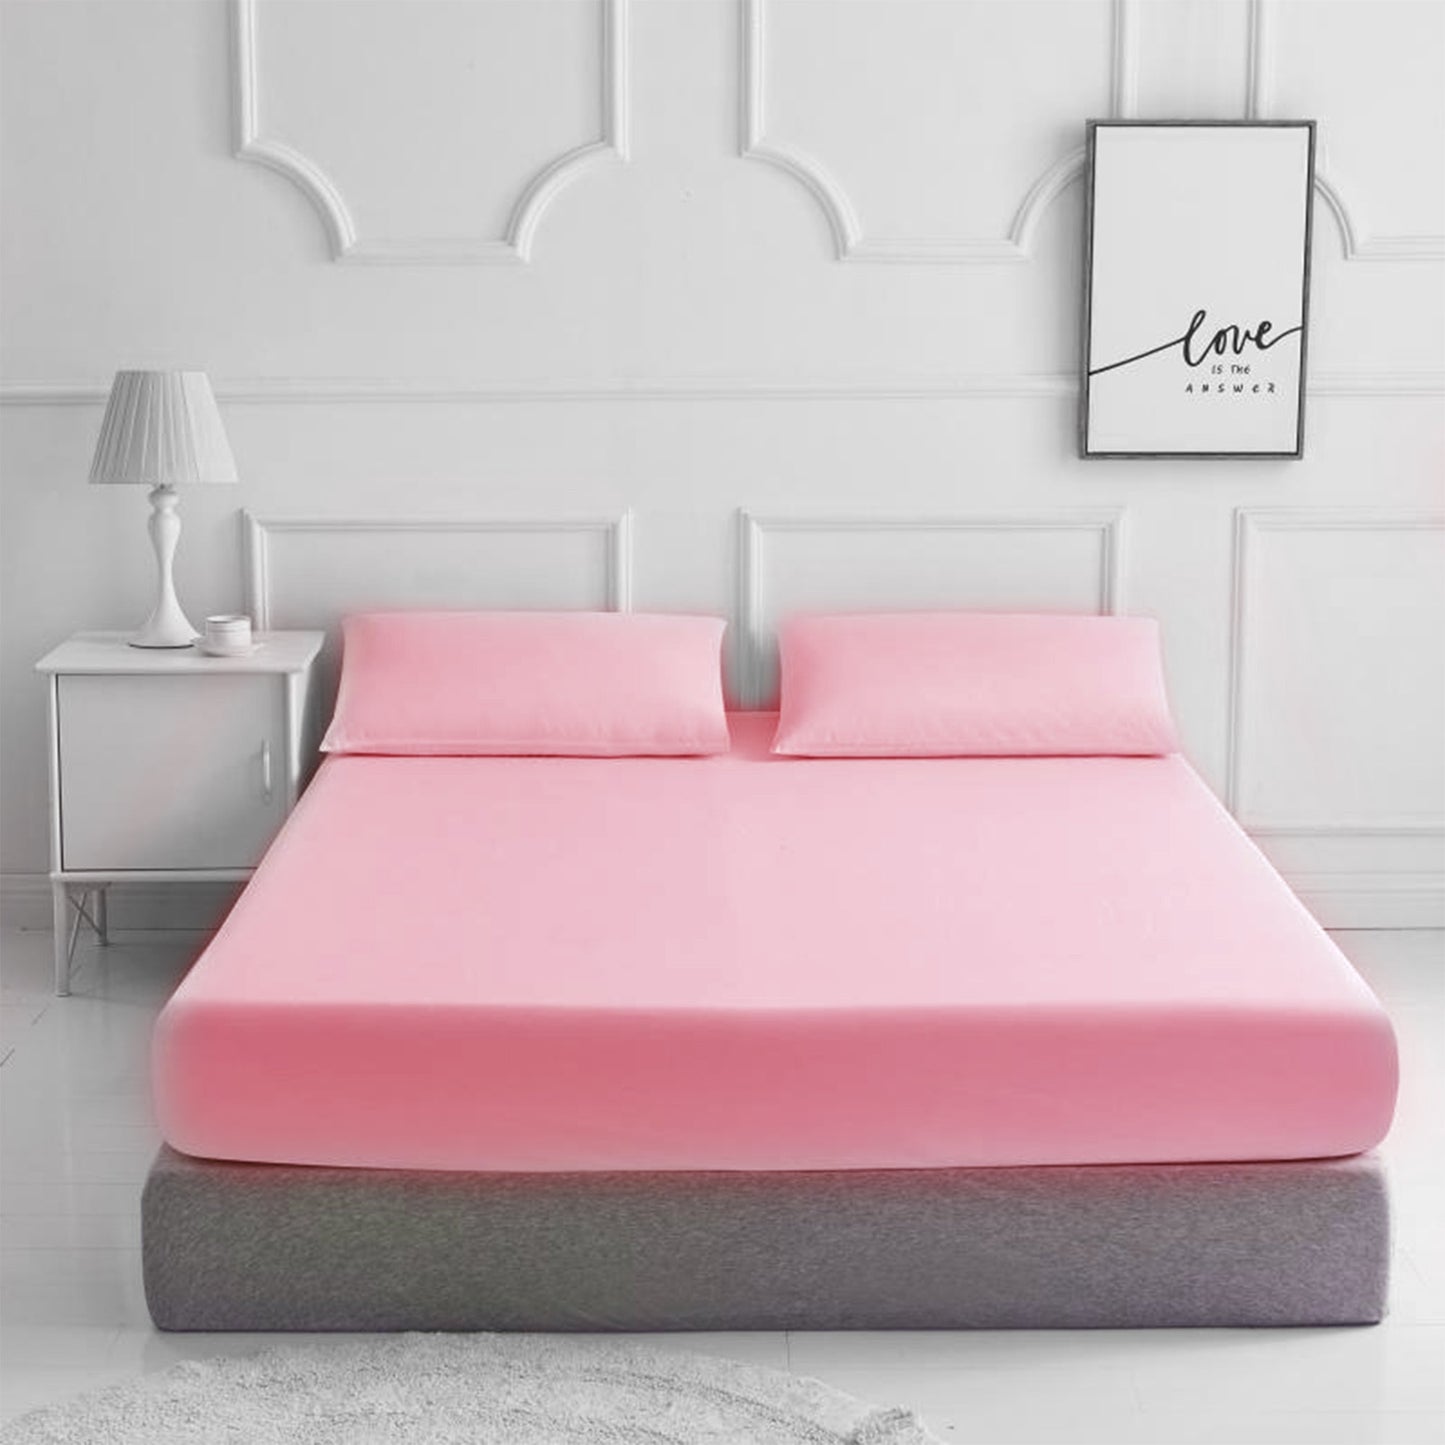 Fitted Bed Sheet Matching FREE 2 X PILLOW CASE Plain Dyed - TheComfortshop.co.ukBed Sheets0721718963714thecomfortshopTheComfortshop.co.ukPC FIT FREE PP Pink KingPinkKingFitted Bed Sheet Matching FREE 2 X PILLOW CASE Plain Dyed - TheComfortshop.co.uk